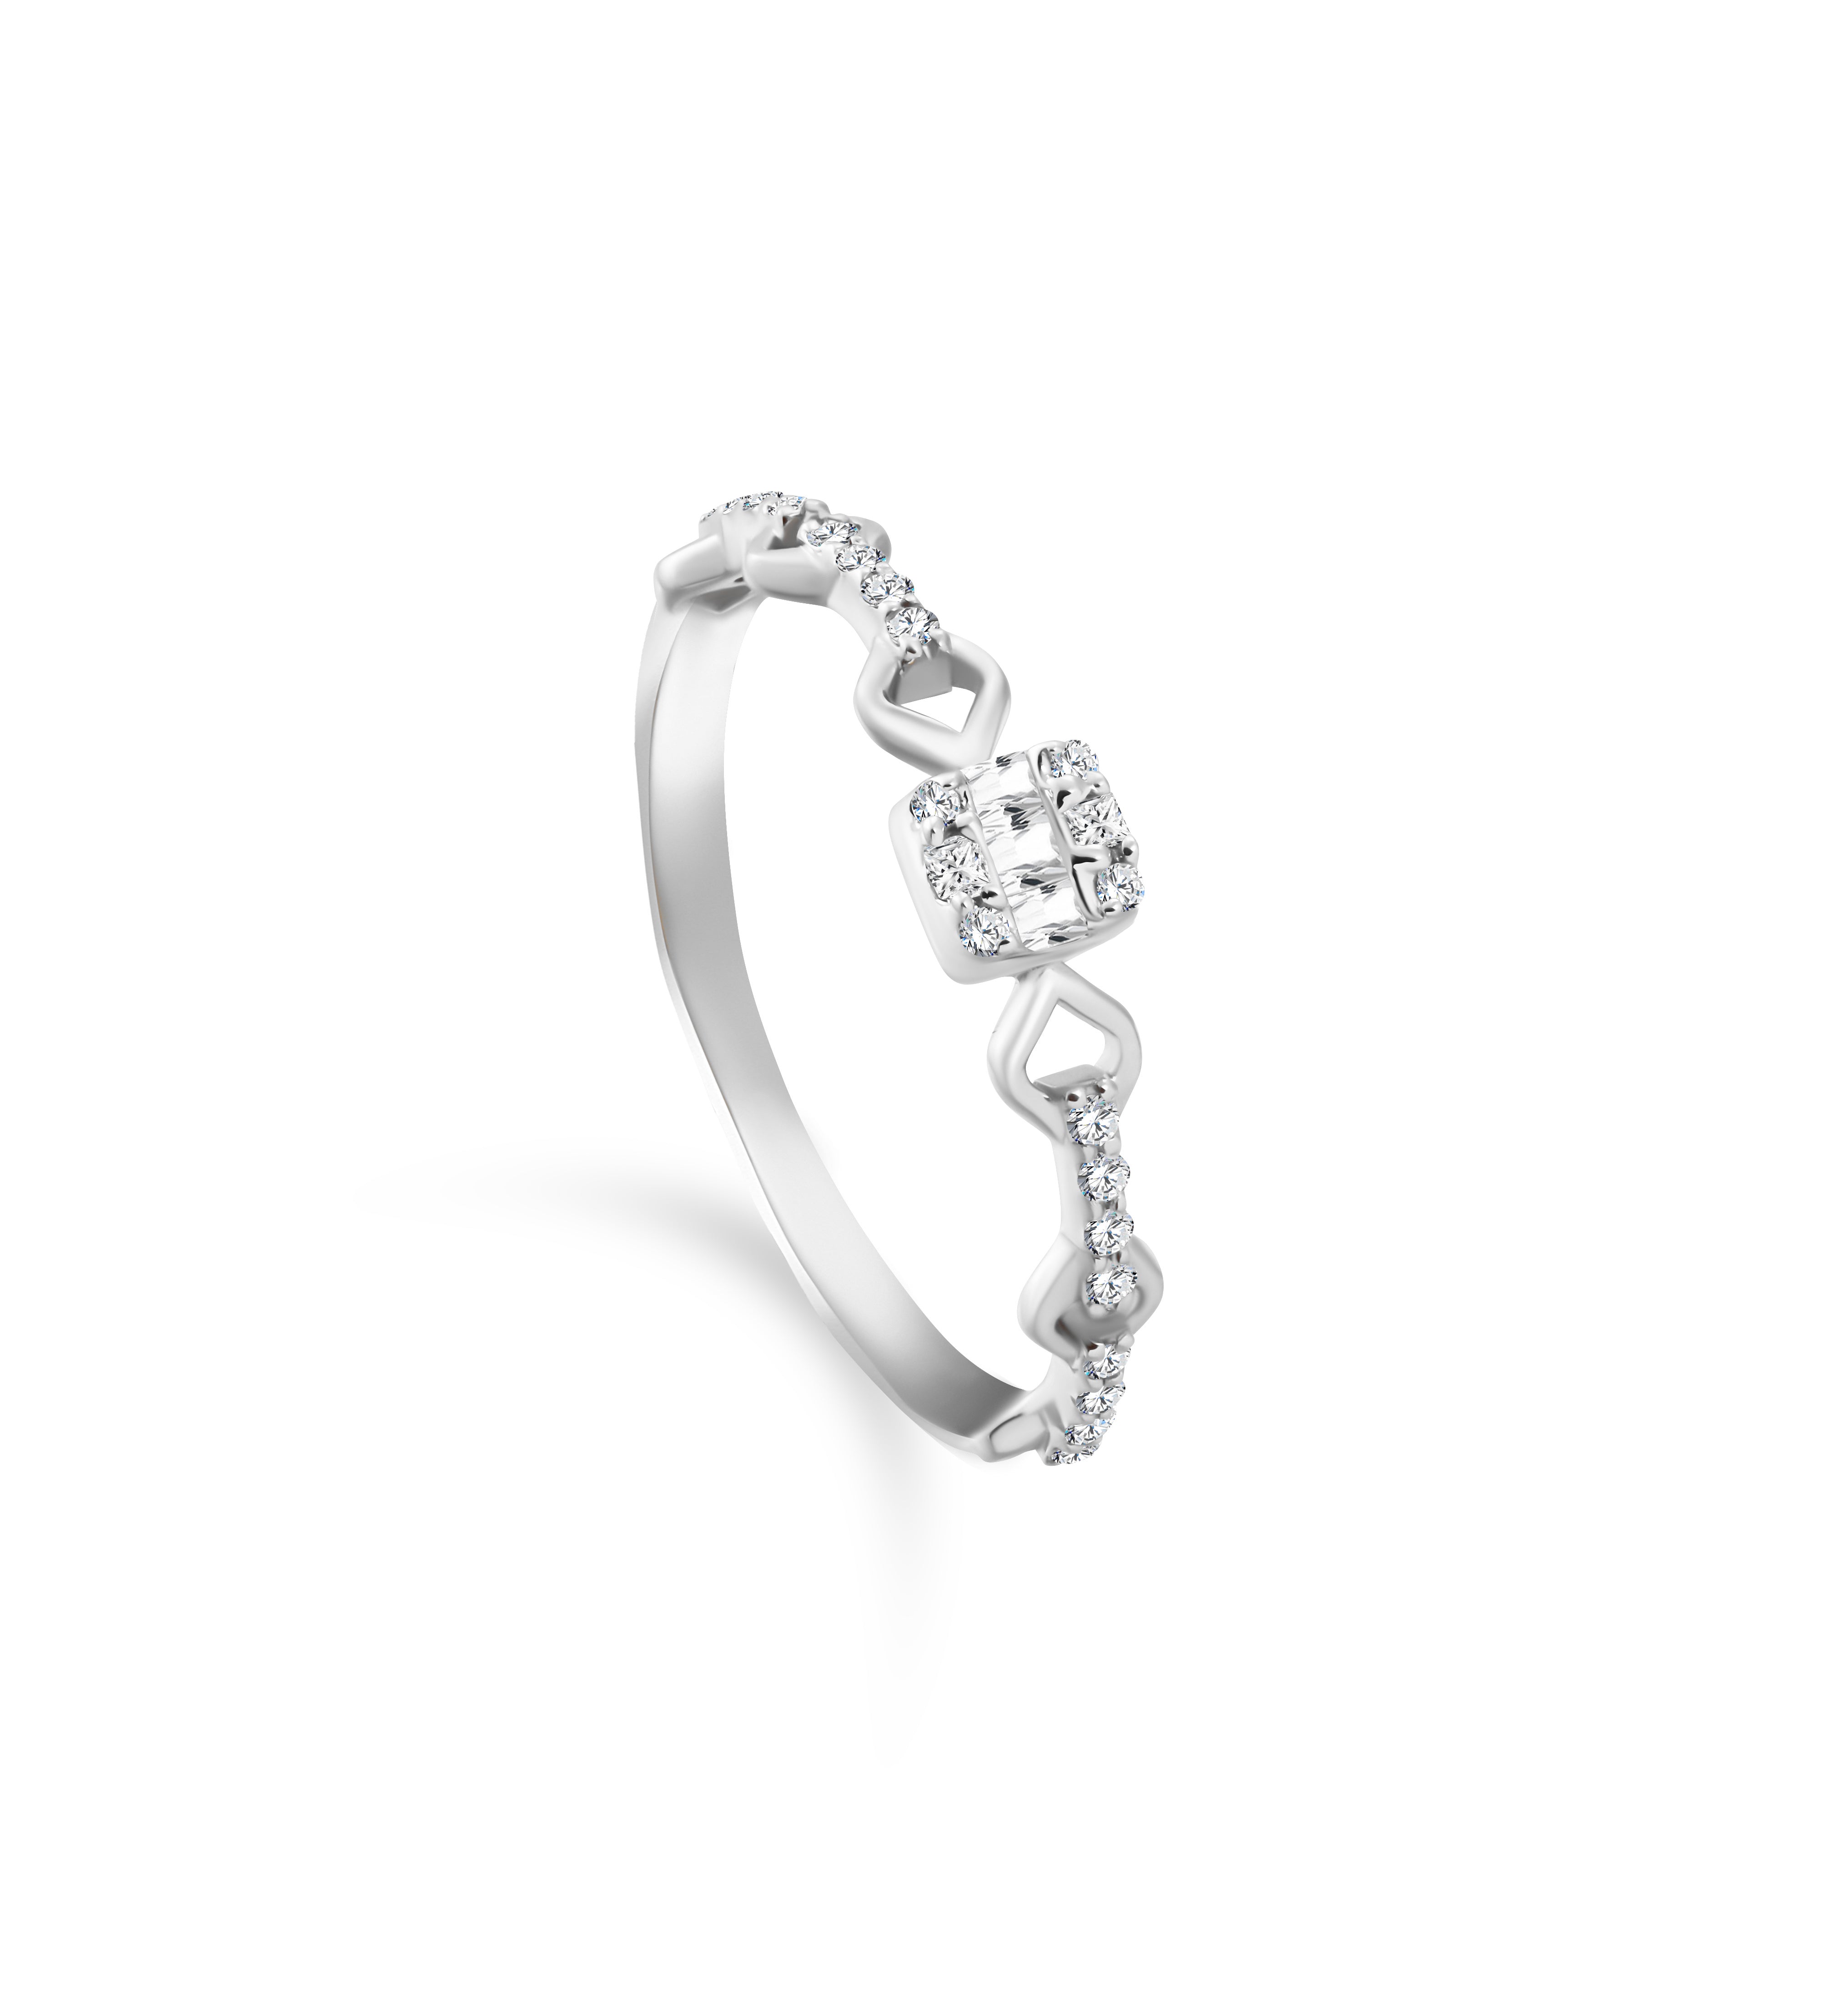 Half diamonded ring with 20 round brilliant, 3 baguette and 2 pear diamonds in 18K White Gold - S-R222S